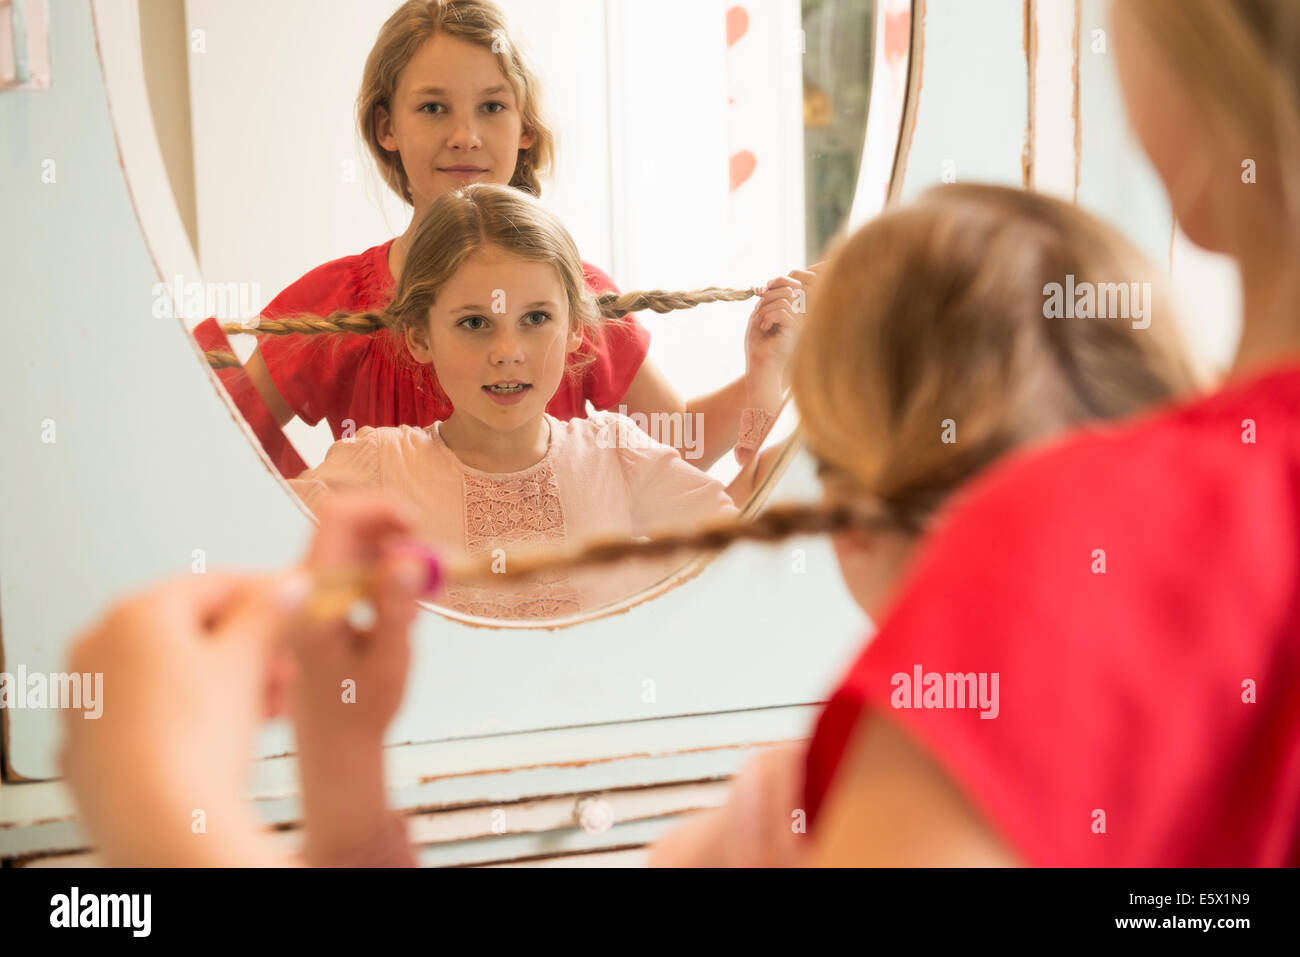 Sisters holding up plaits in bedroom mirror Stock Photo